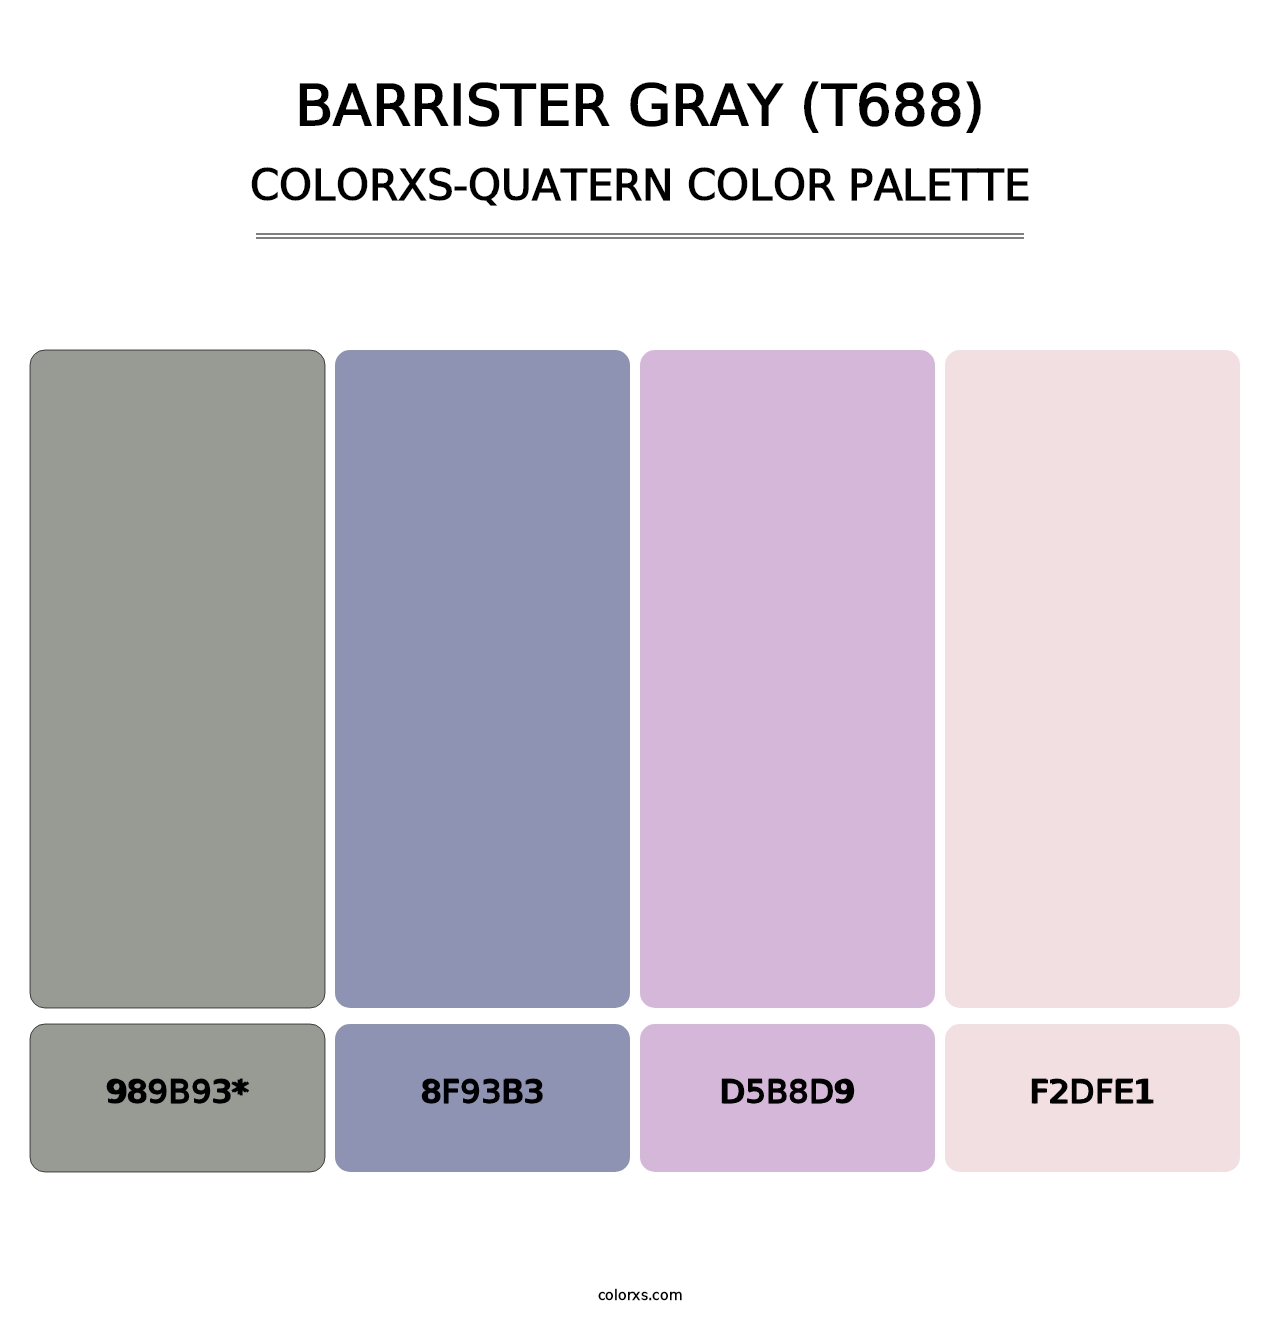 Barrister Gray (T688) - Colorxs Quatern Palette